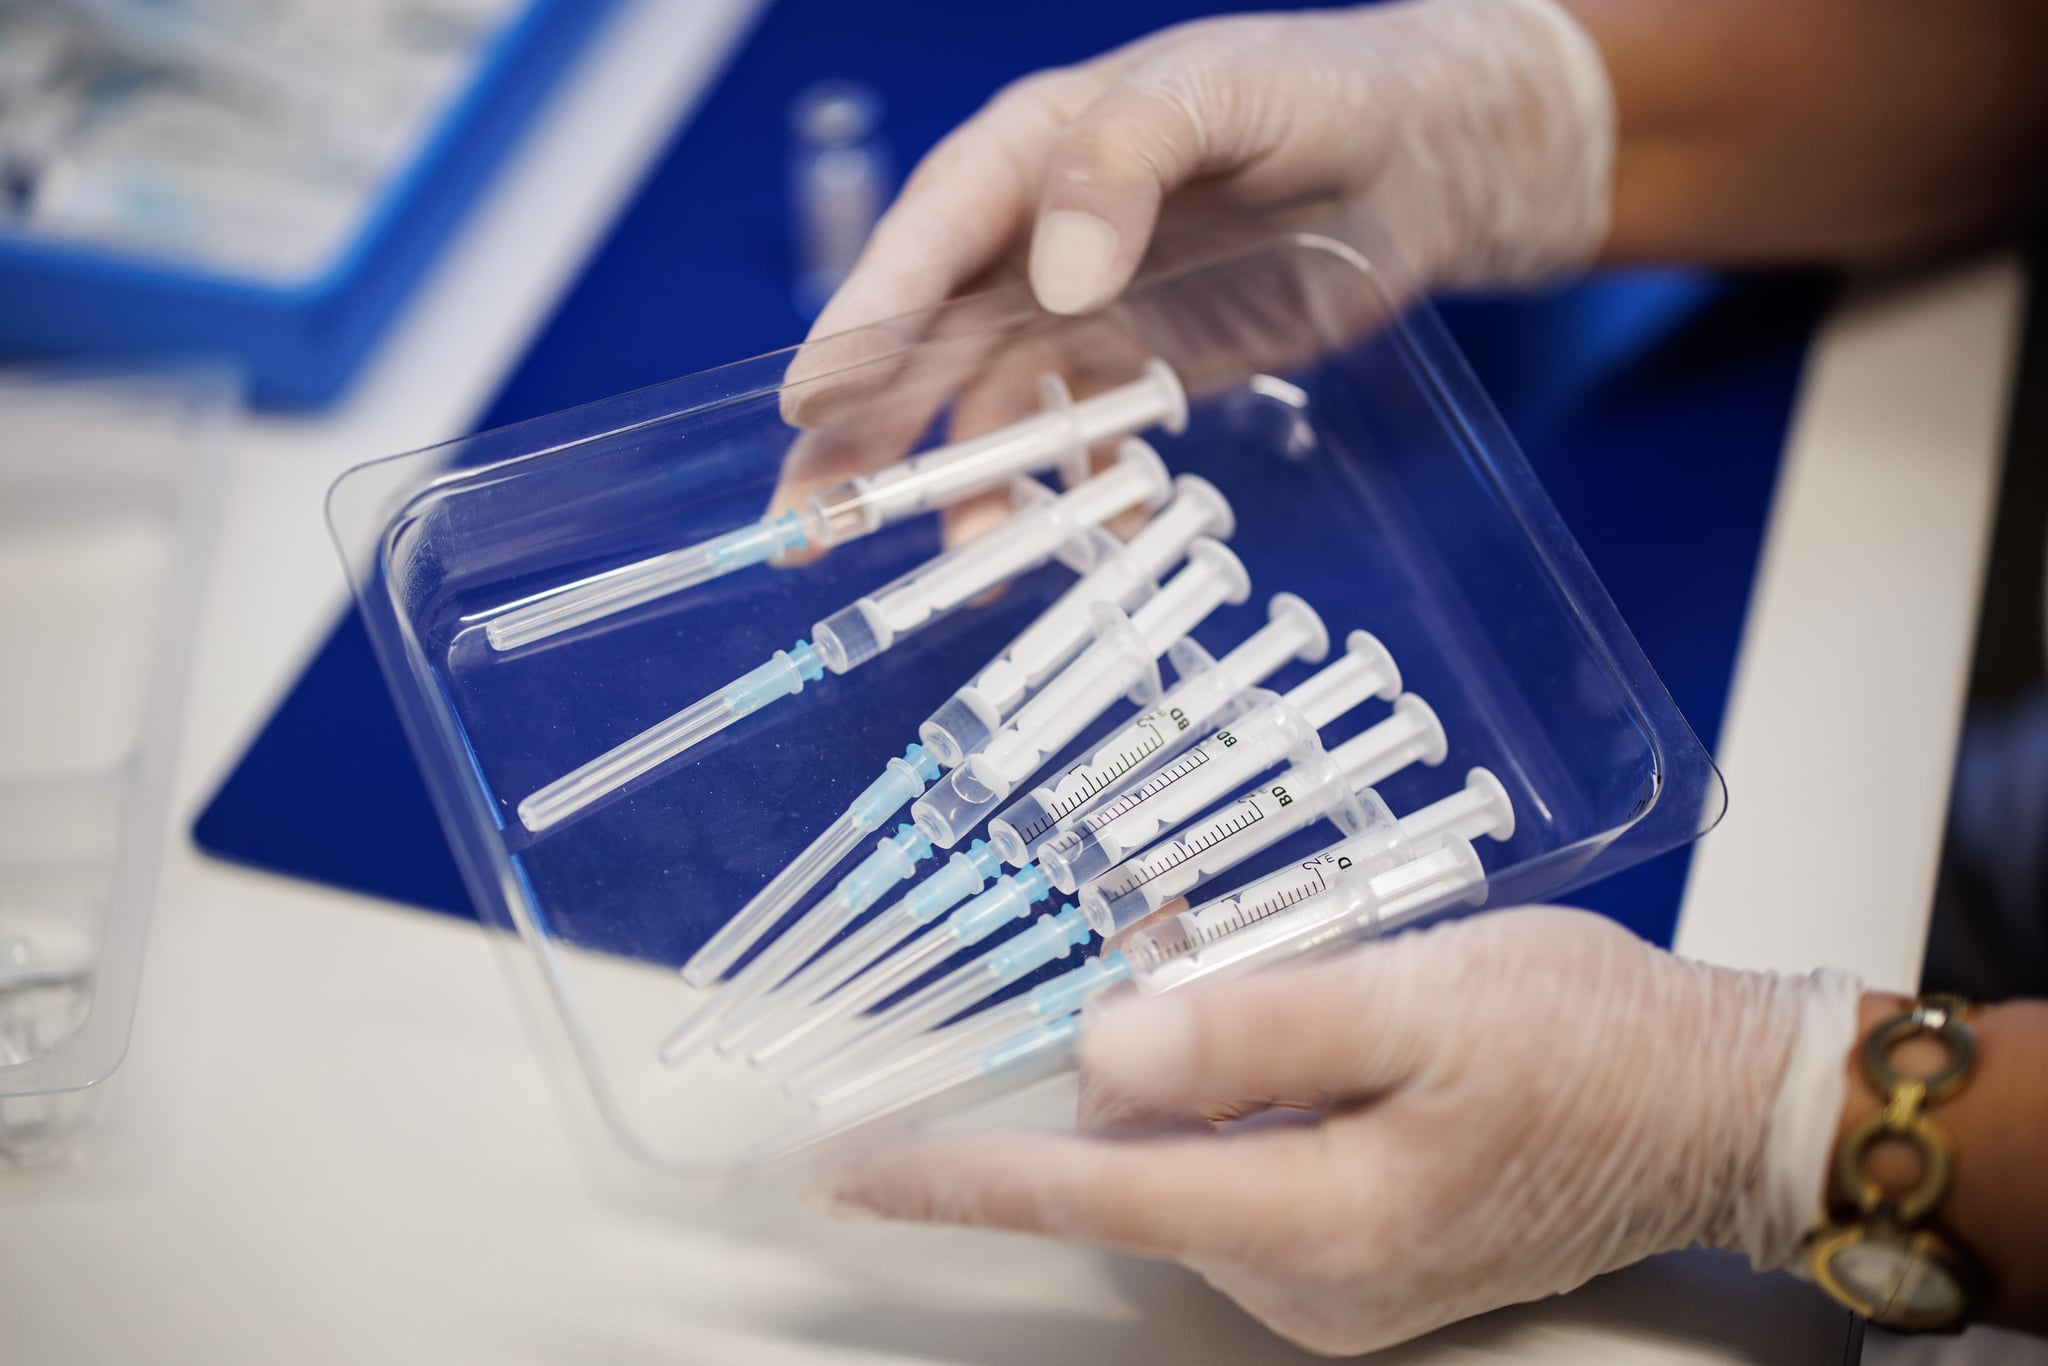 03 March 2022, Bavaria, Freising: A nurse holds a tray of syringes containing the vaccine Nuvaxovid from the manufacturer Novavax at the Freising Vaccination Centre. Photo: Matthias Balk/dpa (Photo by Matthias Balk/picture alliance via Getty Images)